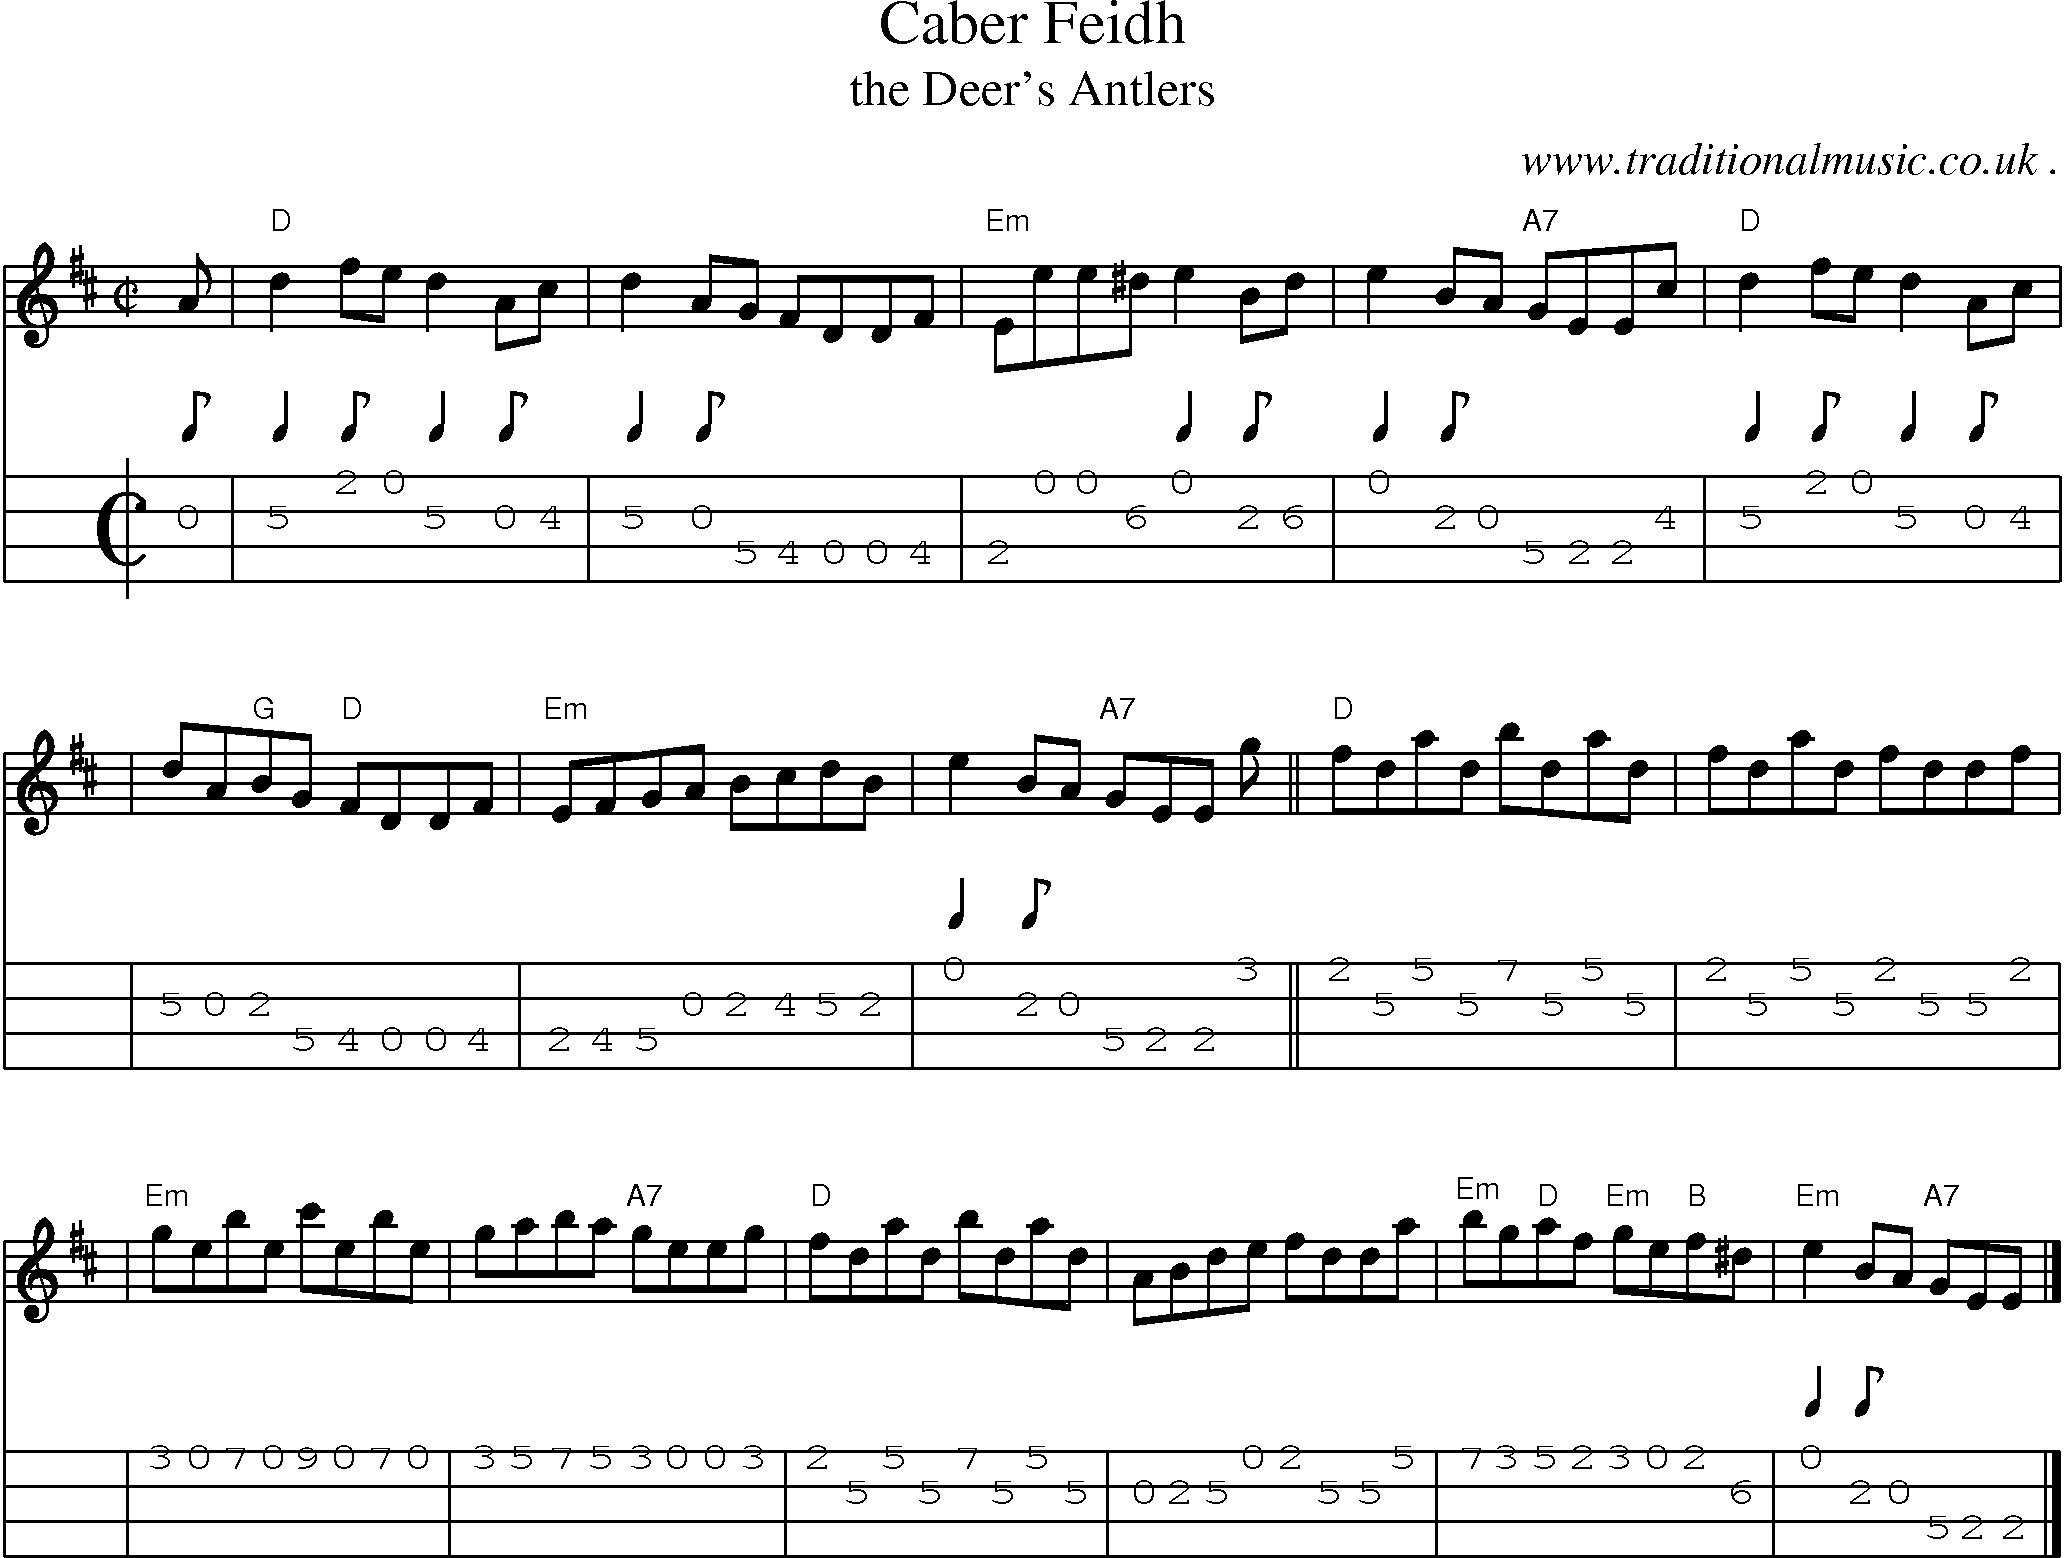 Sheet-music  score, Chords and Mandolin Tabs for Caber Feidh